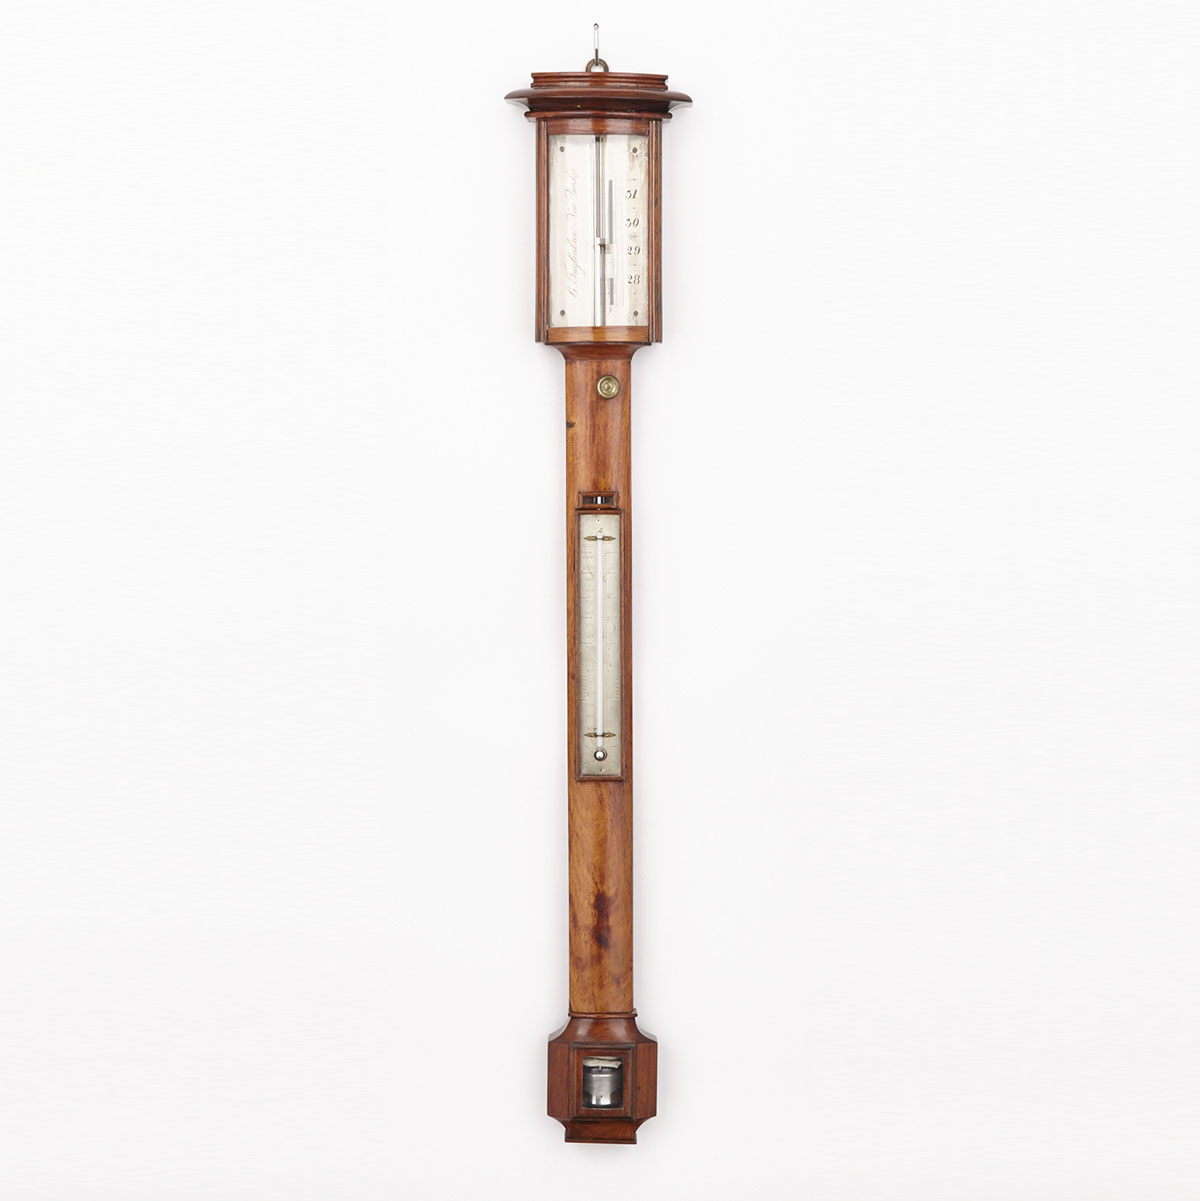 American Rosewood Bow Front Stick Barometer, George Tagliabue, New York, N.Y., c.1840